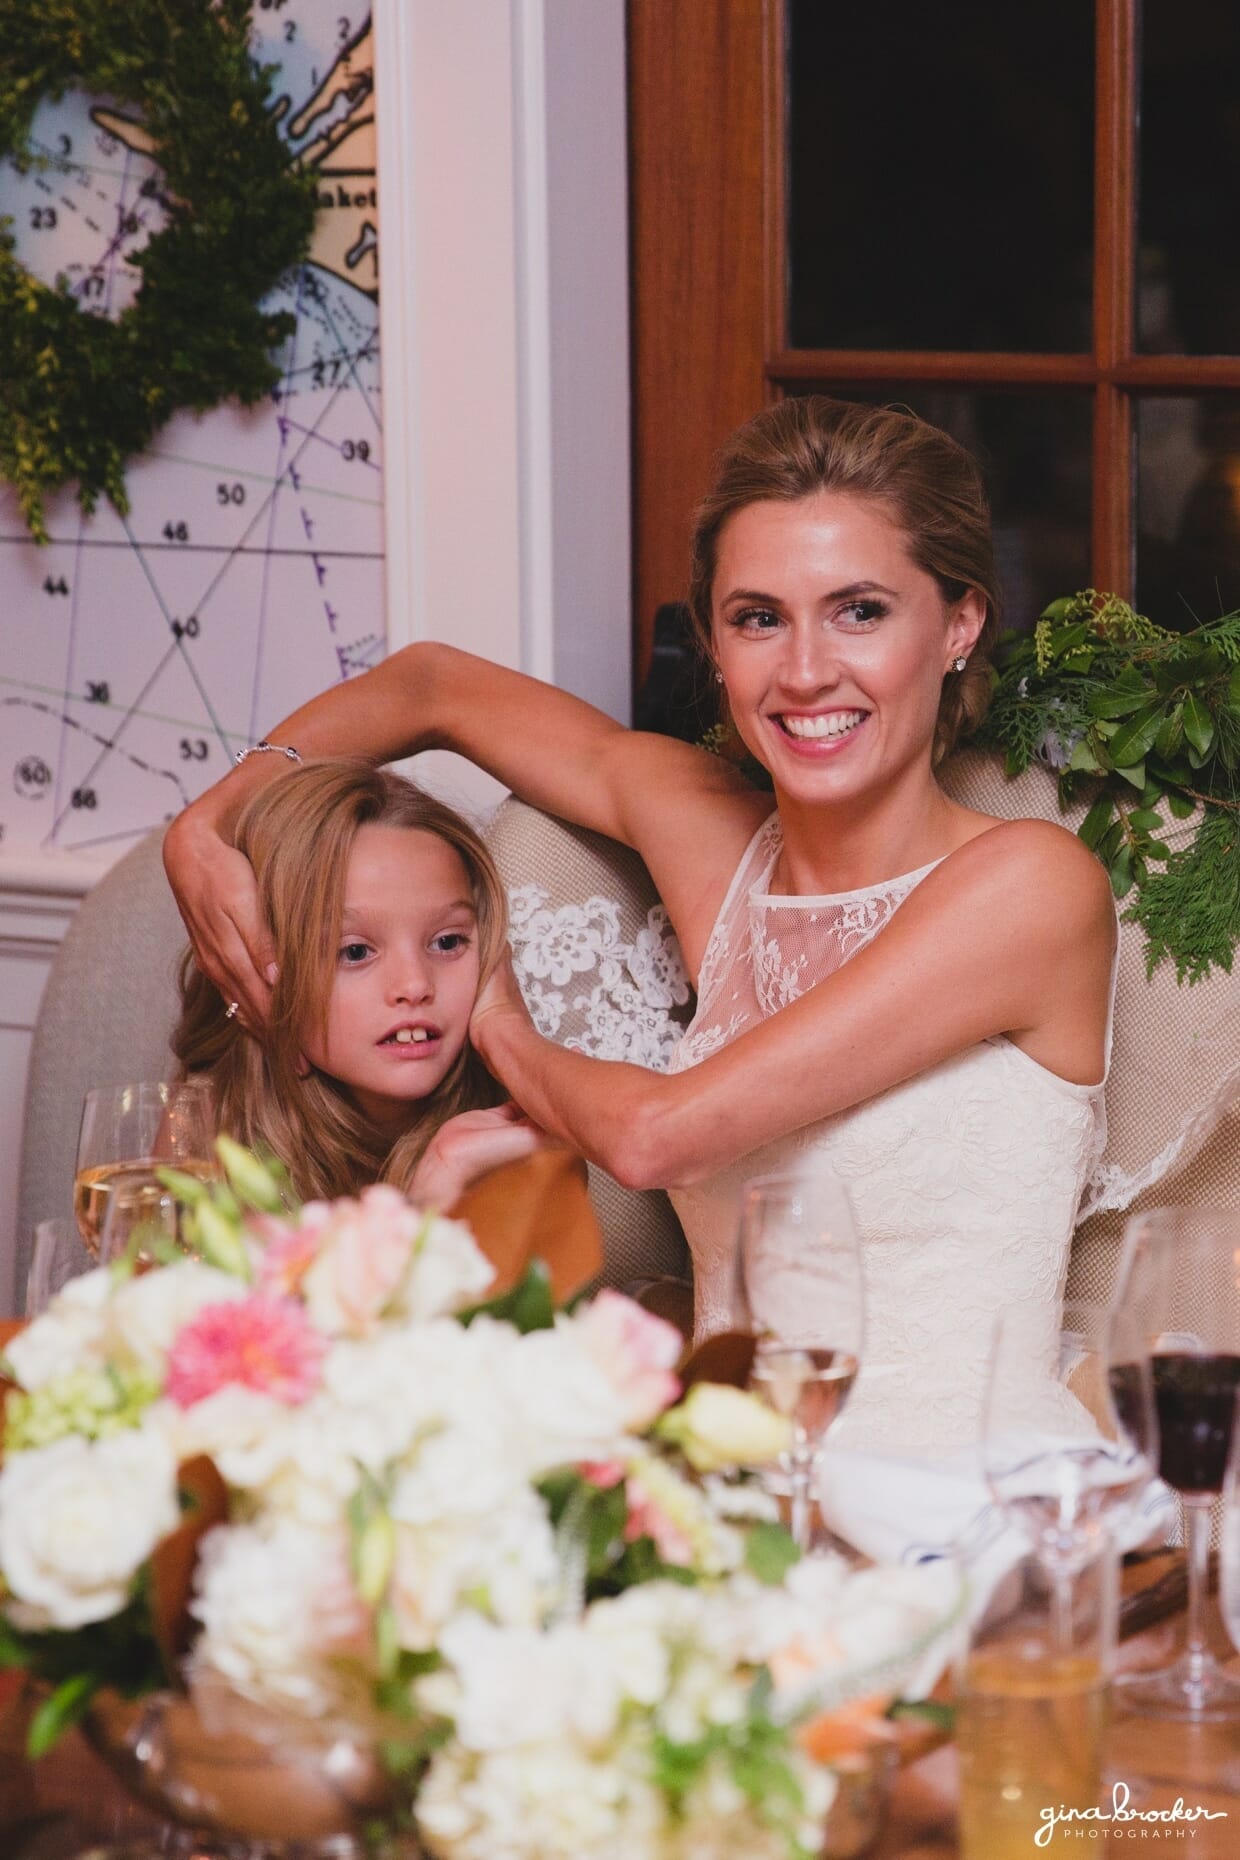 A bride covers her flower girl's ears during the wedding speeches at her Nantucket wedding in the Westmoor Club